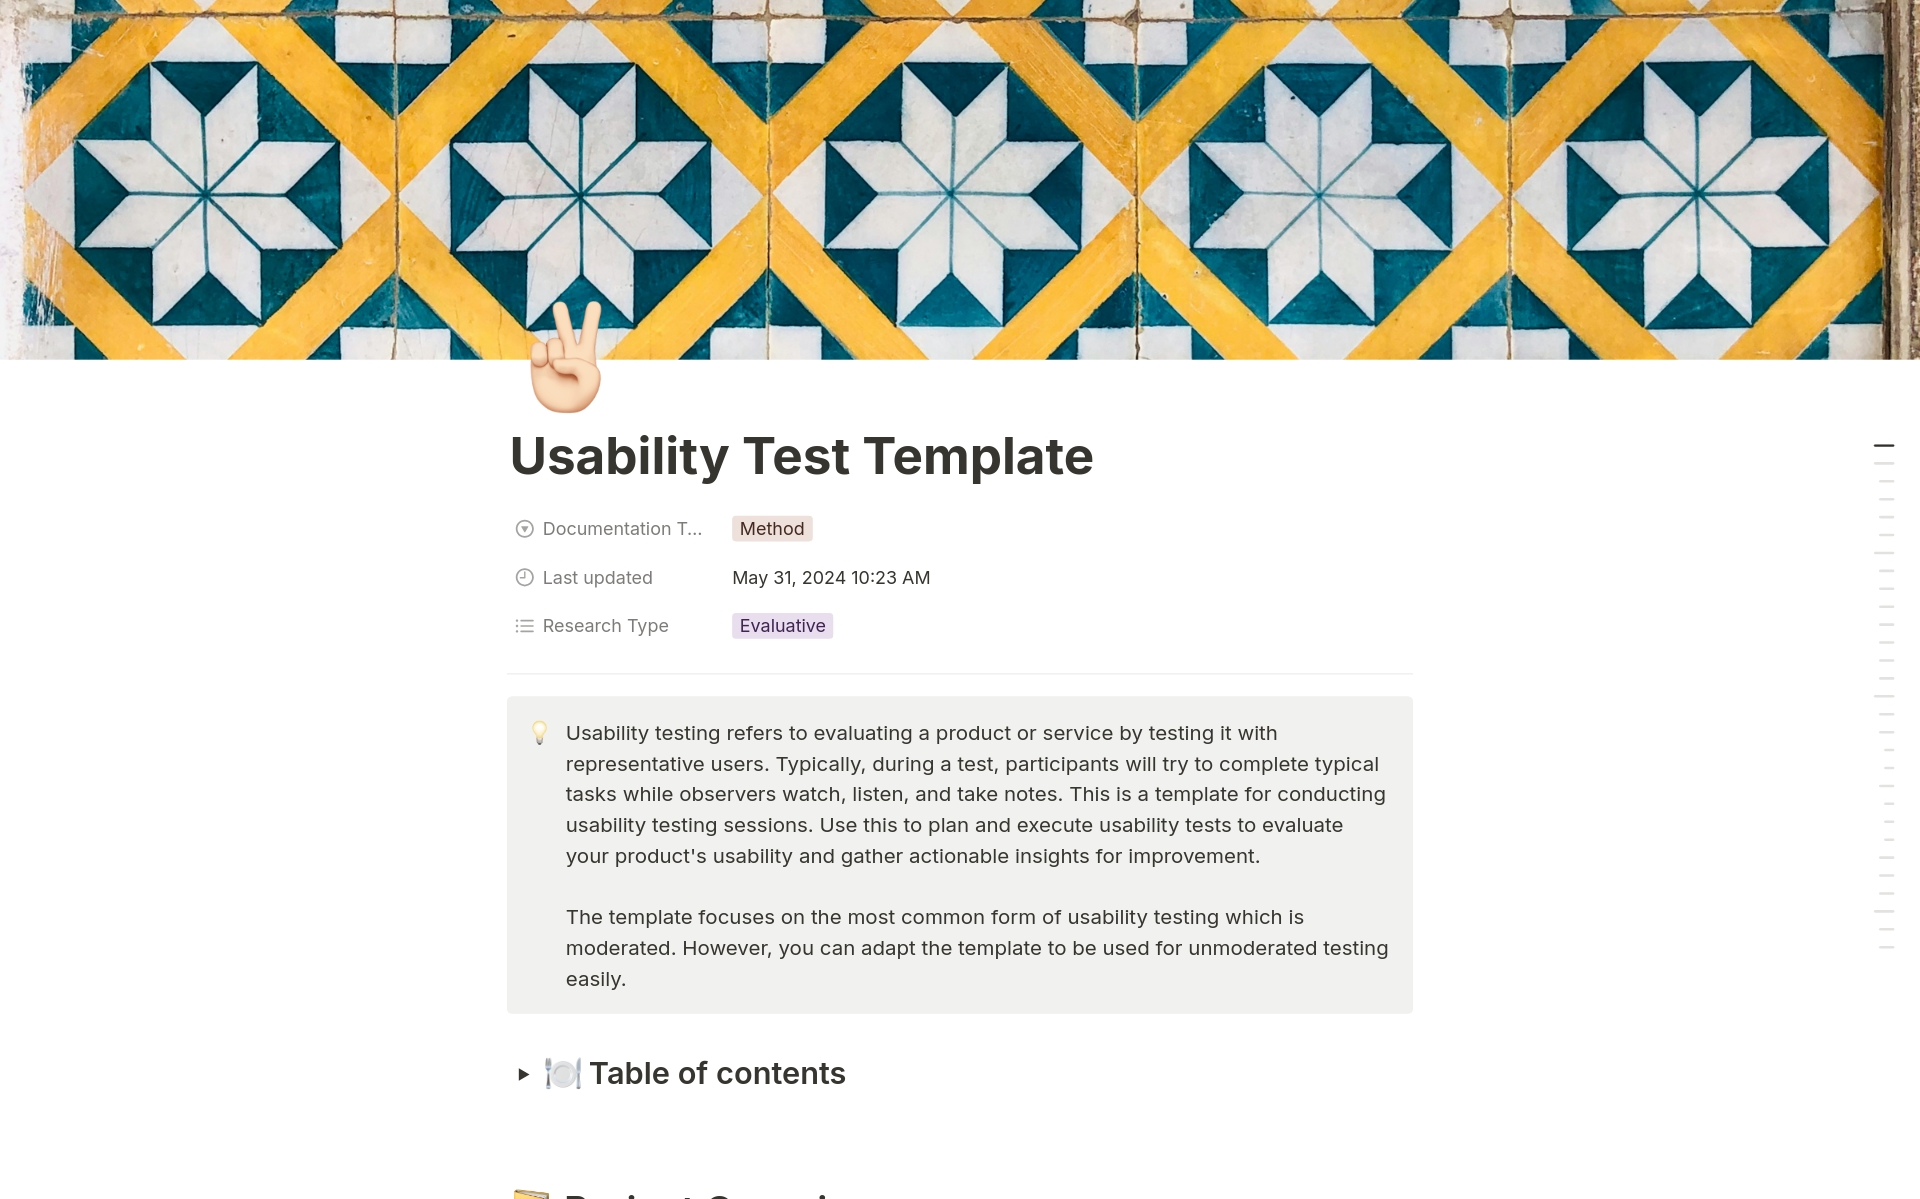 UX Research Usability Testing Template

Plan, organise and analyse usability testing with this Notion template focusing on setting up, test script, test scenario's, analysis and formulating recommendations based on your research.